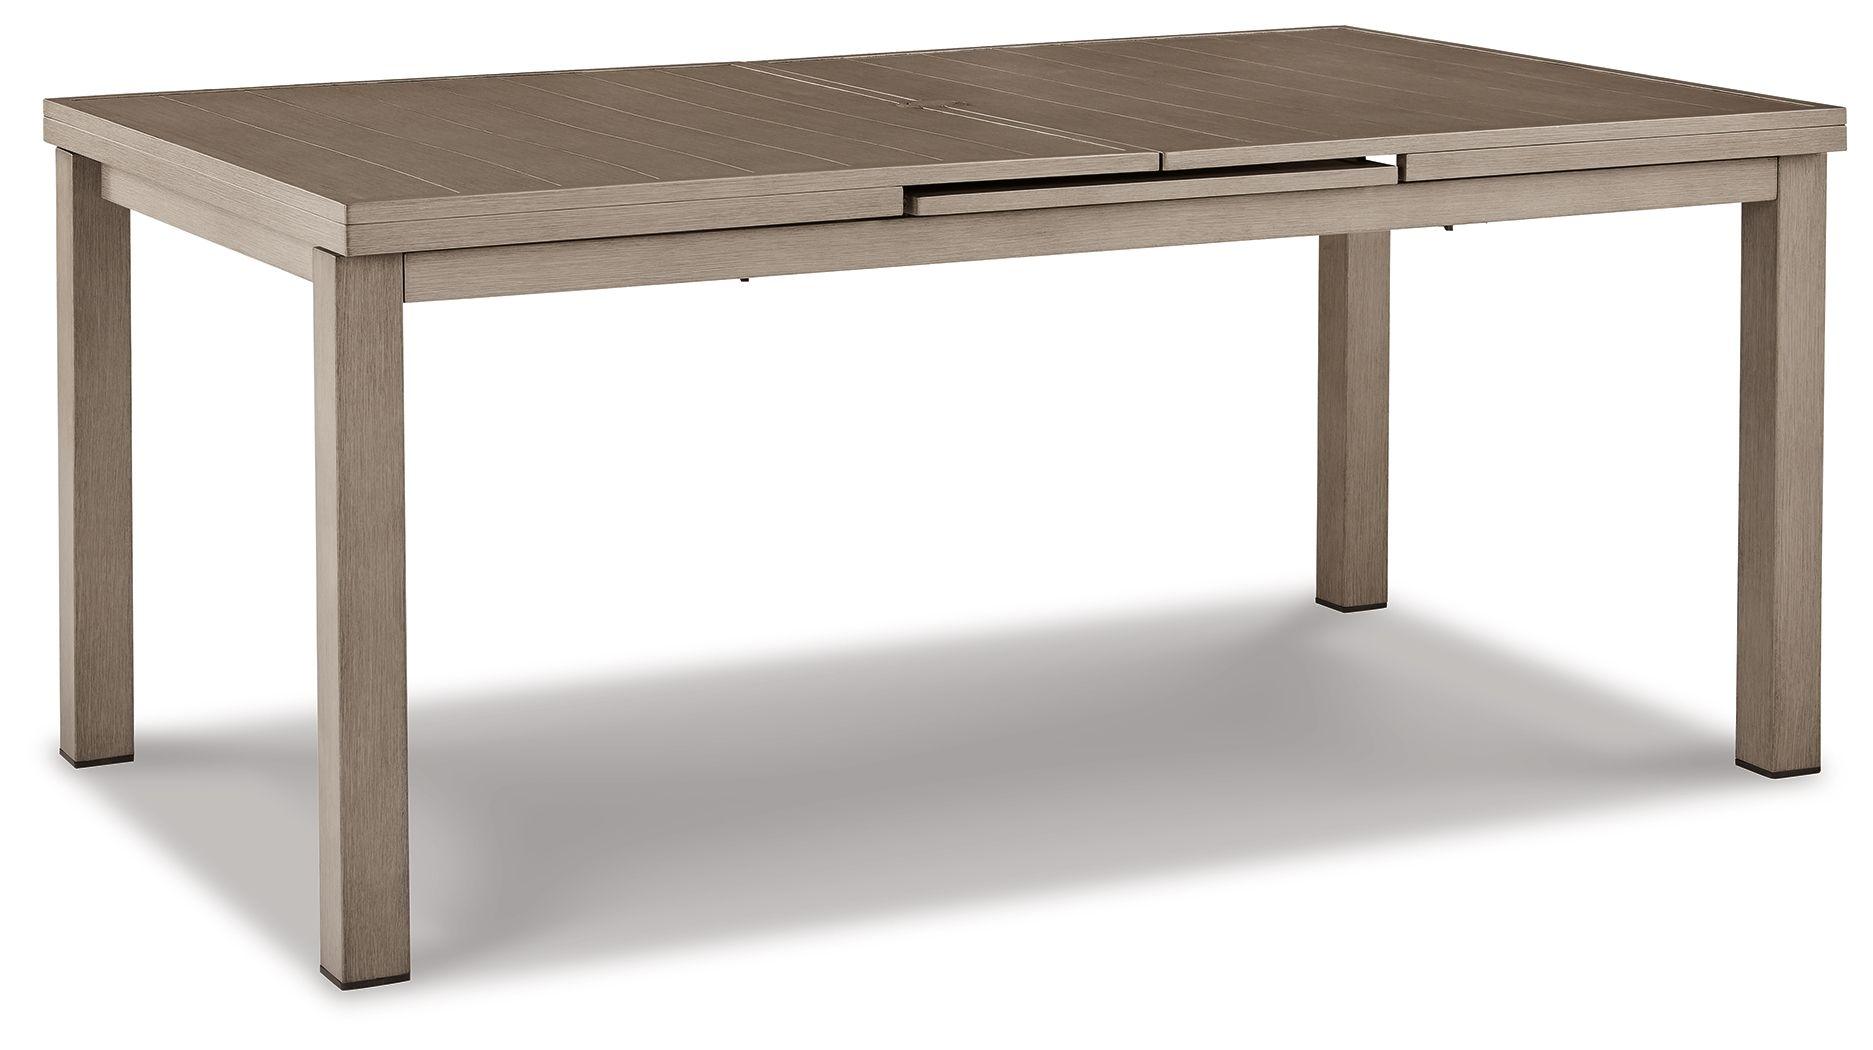 Signature Design by Ashley® - Beach Front - Beige - Rect Dining Room Ext Table - 5th Avenue Furniture